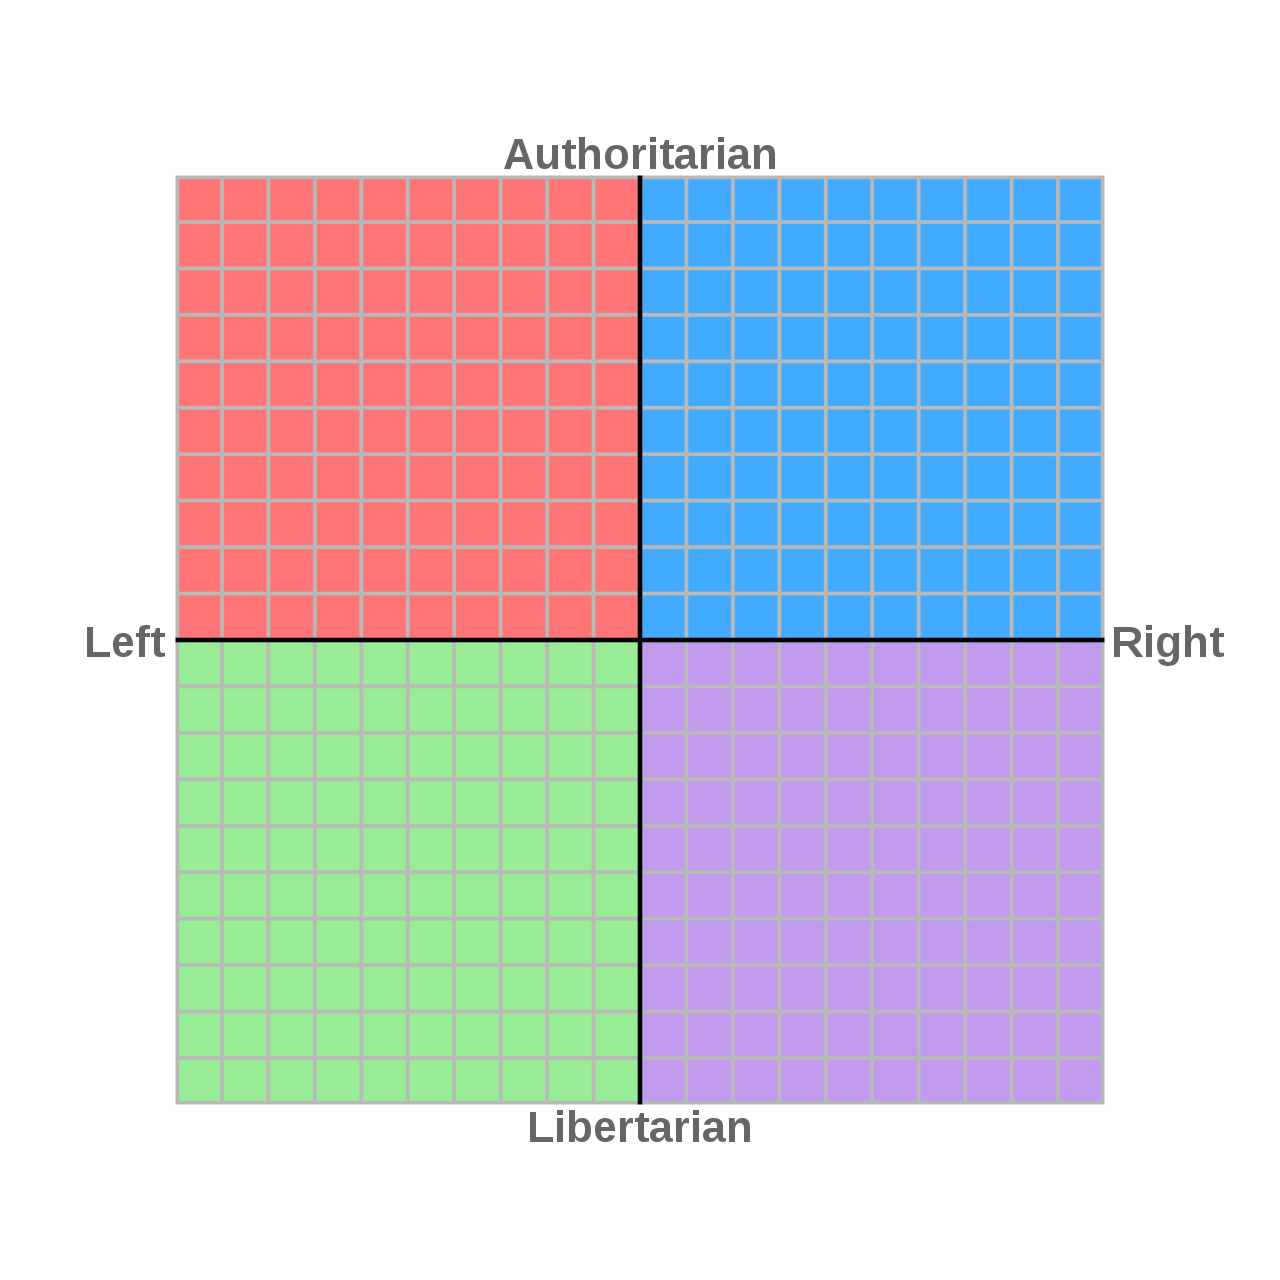 forget alignment: here's where baldur's gate 3's companions fall on the real-life political compass